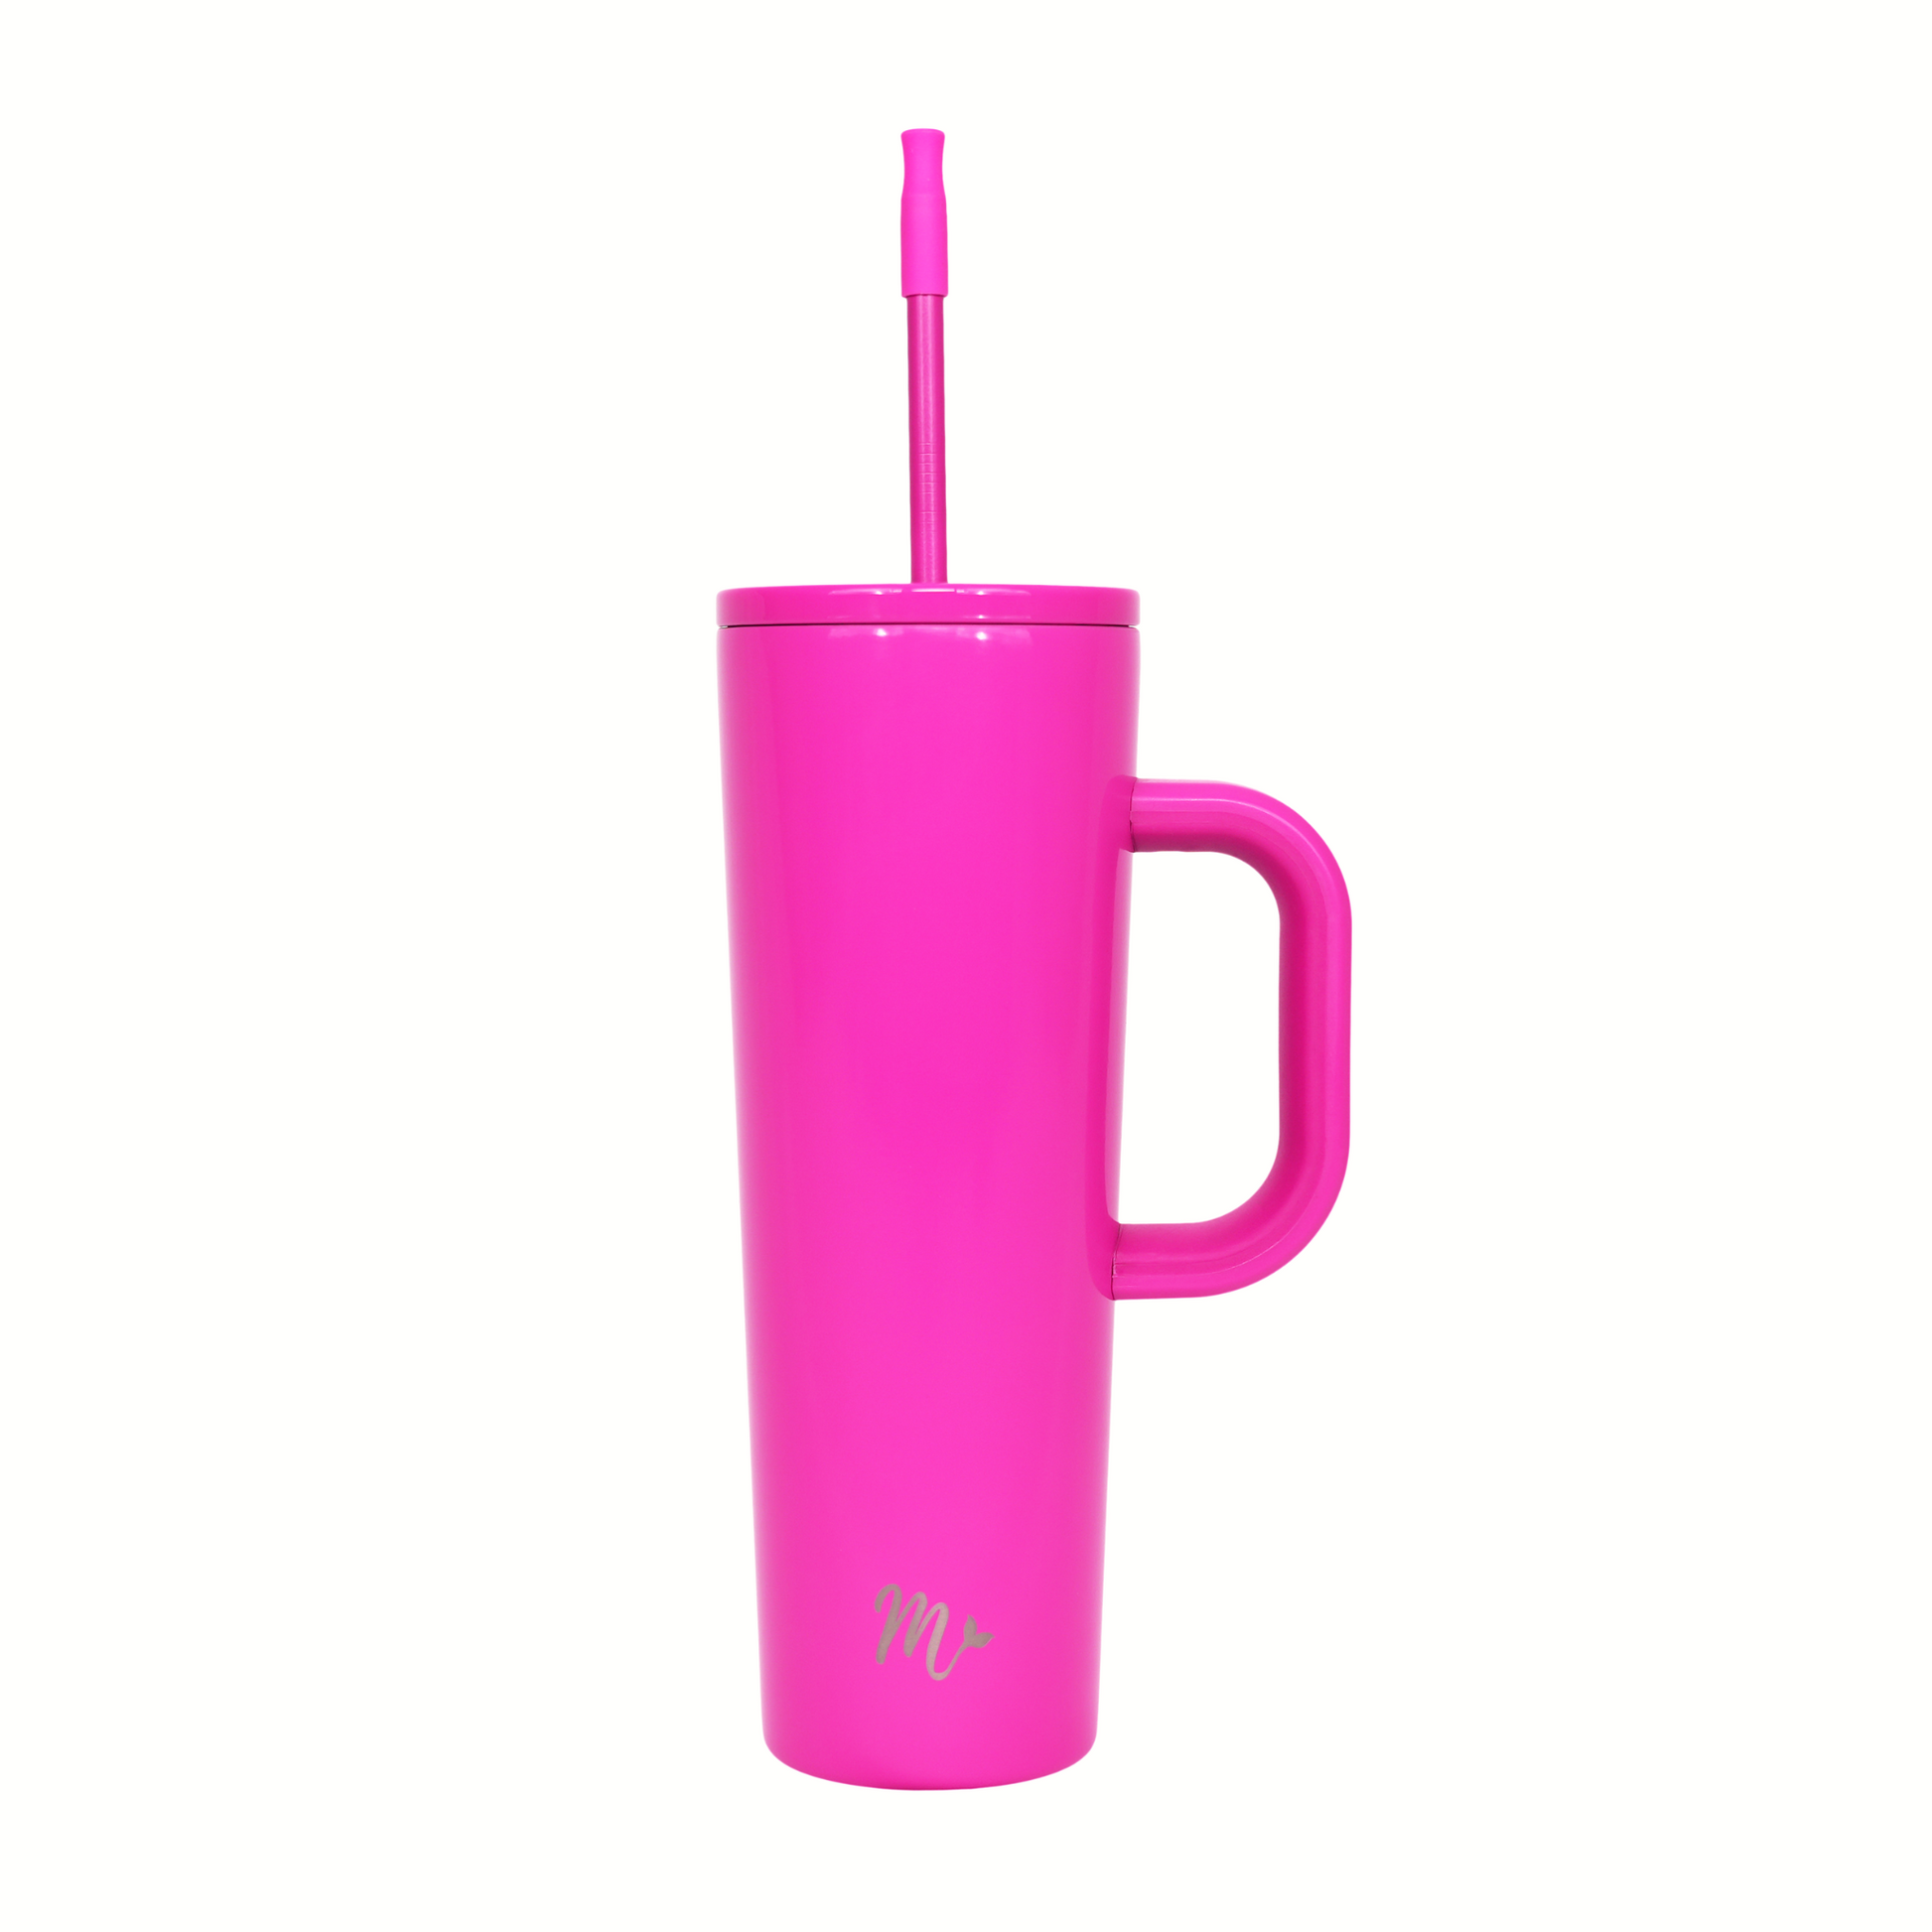 barbie pink tumbler, hot pink tumbler, tumbler with handle, trendy 30oz cup, leakproof tumbler, cute trendy cup, travel mug, straw included, keeps drinks cold, aesthetic cup